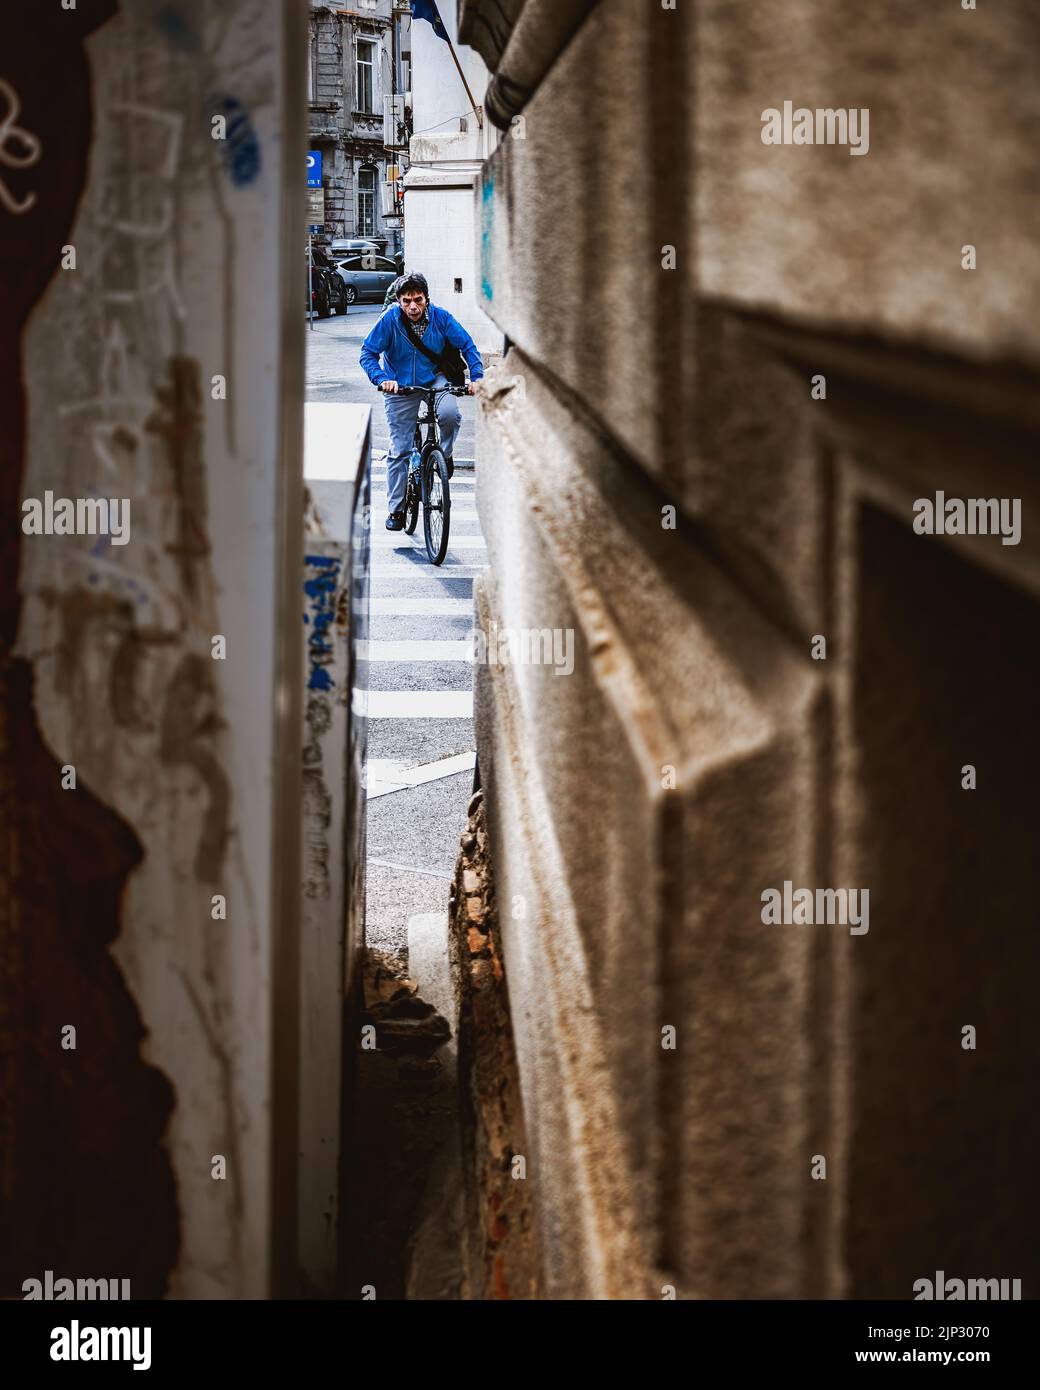 A man in a blue shirt visible from the small hole between buildings riding a bicycle on the streets of Bucharest Stock Photo